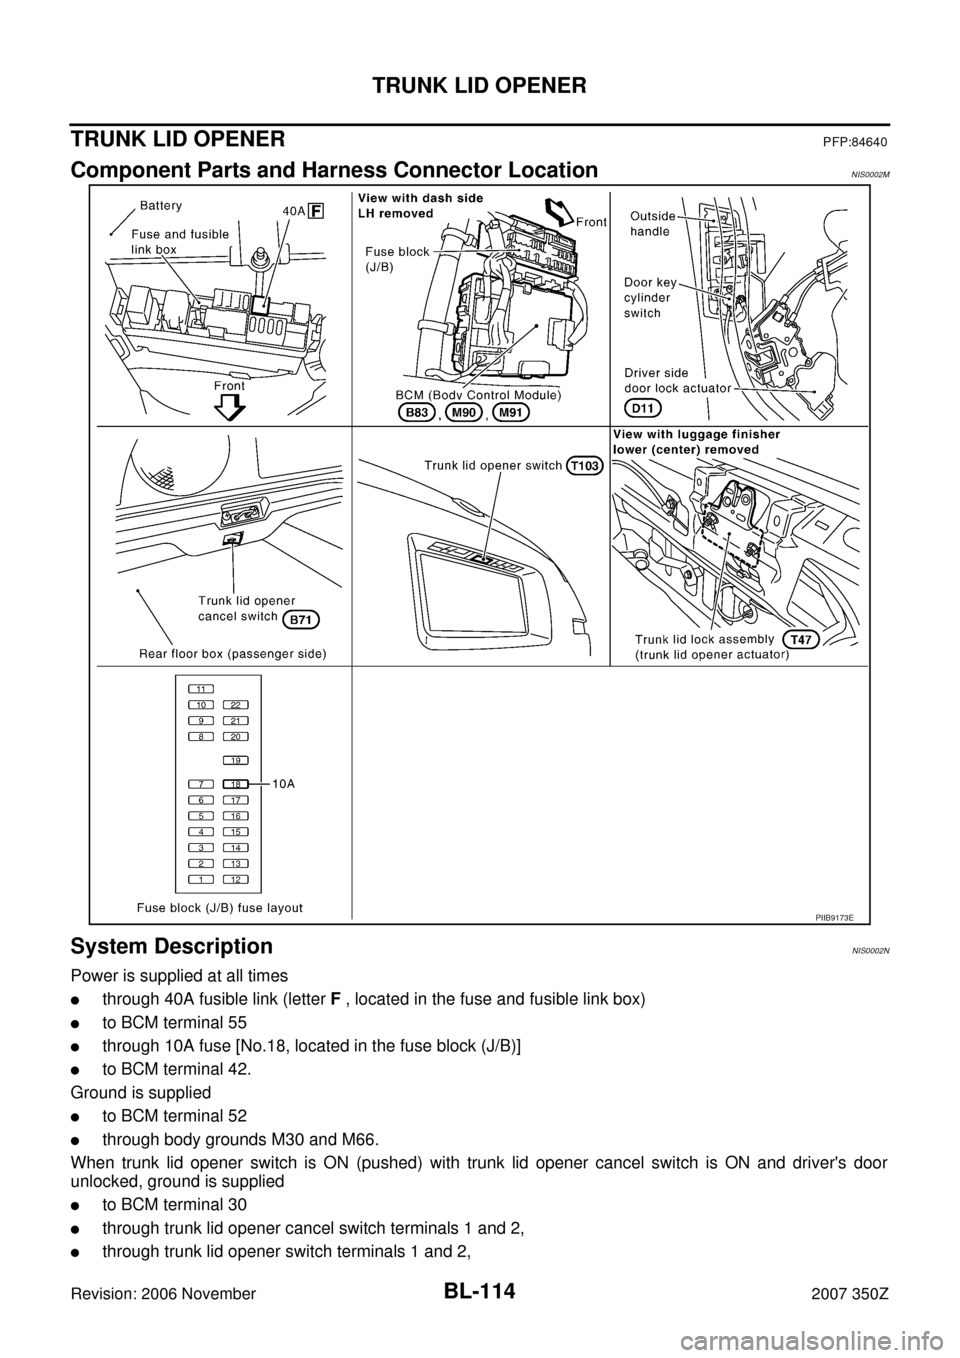 NISSAN 350Z 2007 Z33 Body, Lock And Security System User Guide BL-114
TRUNK LID OPENER
Revision: 2006 November2007 350Z
TRUNK LID OPENERPFP:84640
Component Parts and Harness Connector LocationNIS0002M
System DescriptionNIS0002N
Power is supplied at all times
thr